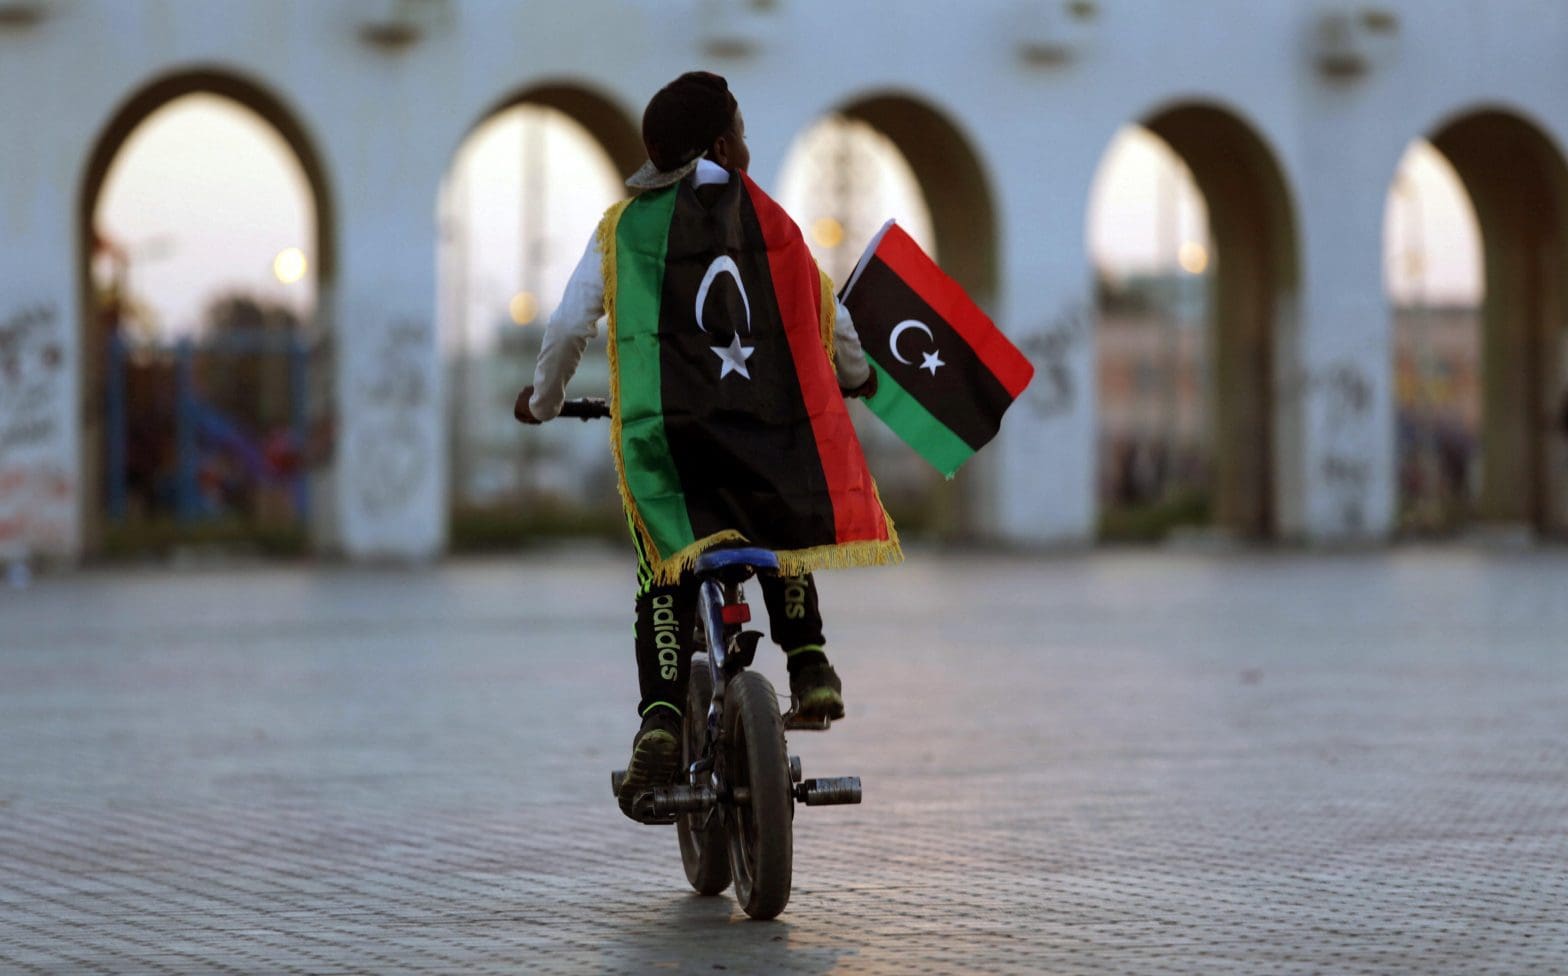 A boy wearing a Libyan flag takes part in a celebration marking the sixth anniversary of the Libyan revolution, in Benghazi, Libya February 17, 2017. REUTERS/Esam Omran Al-Fetori TPX IMAGES OF THE DAY - RTSZ7CB